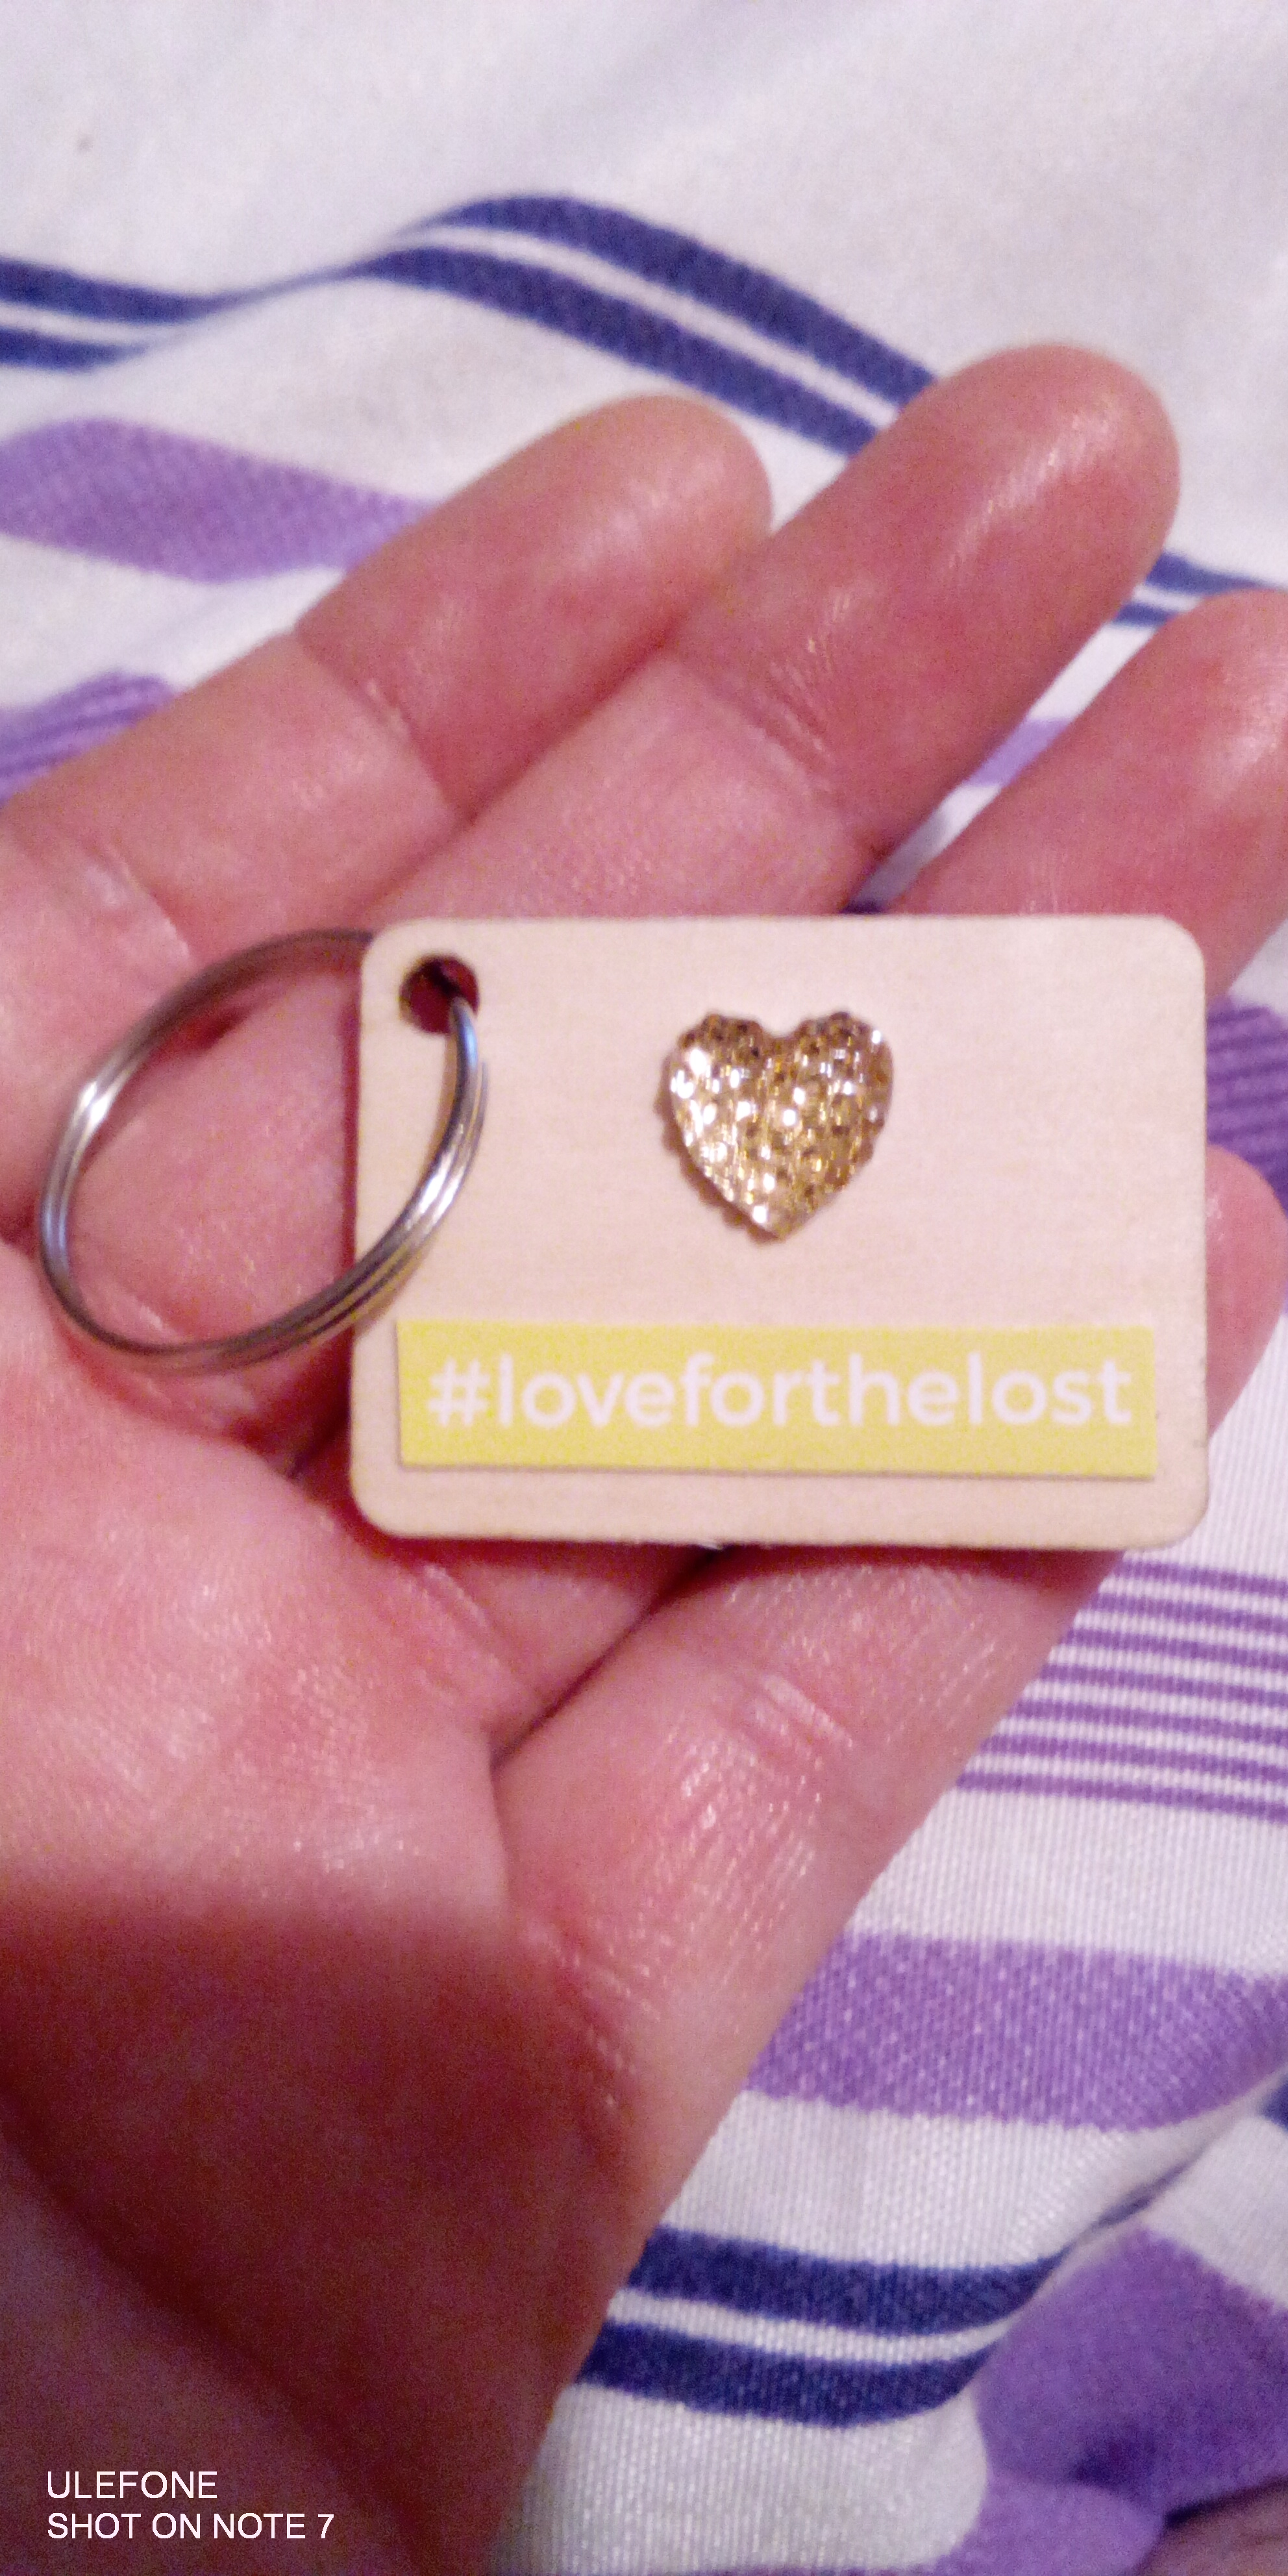 An example of the keyring for people who donate, but have not requested a name.